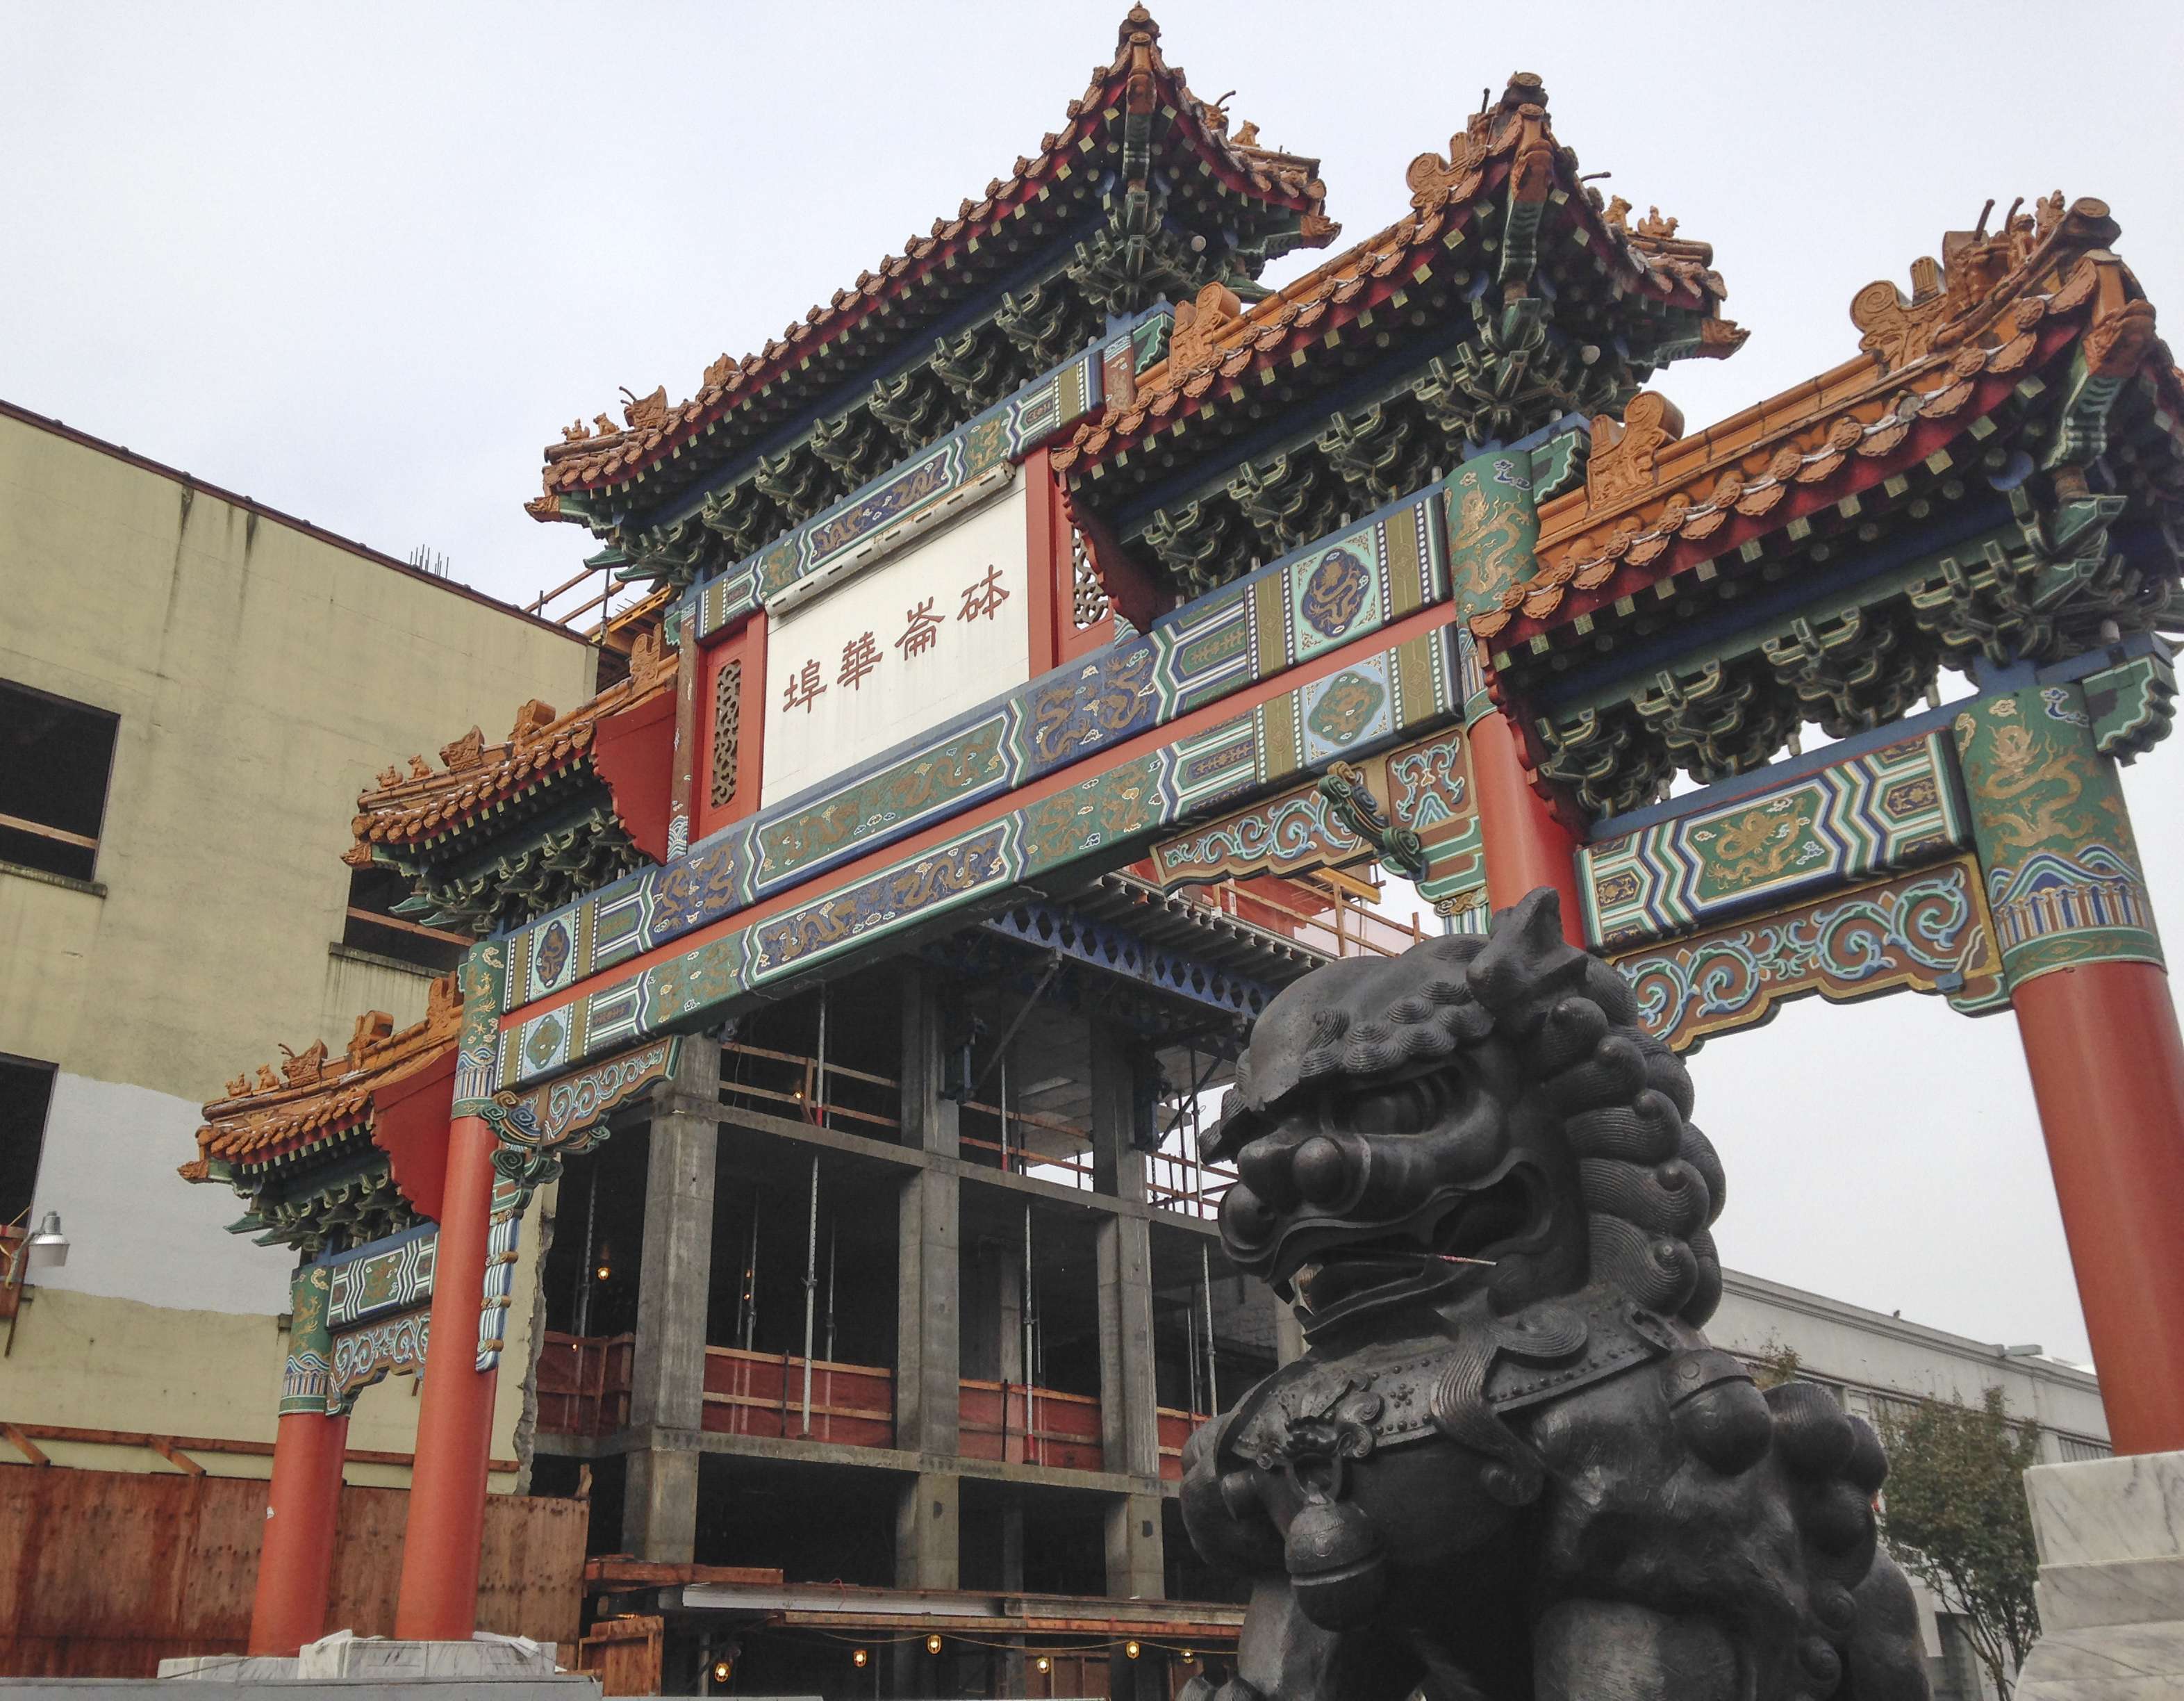 The Chinese Gate in Portland’s Chinatown. Photos: Amy Wu